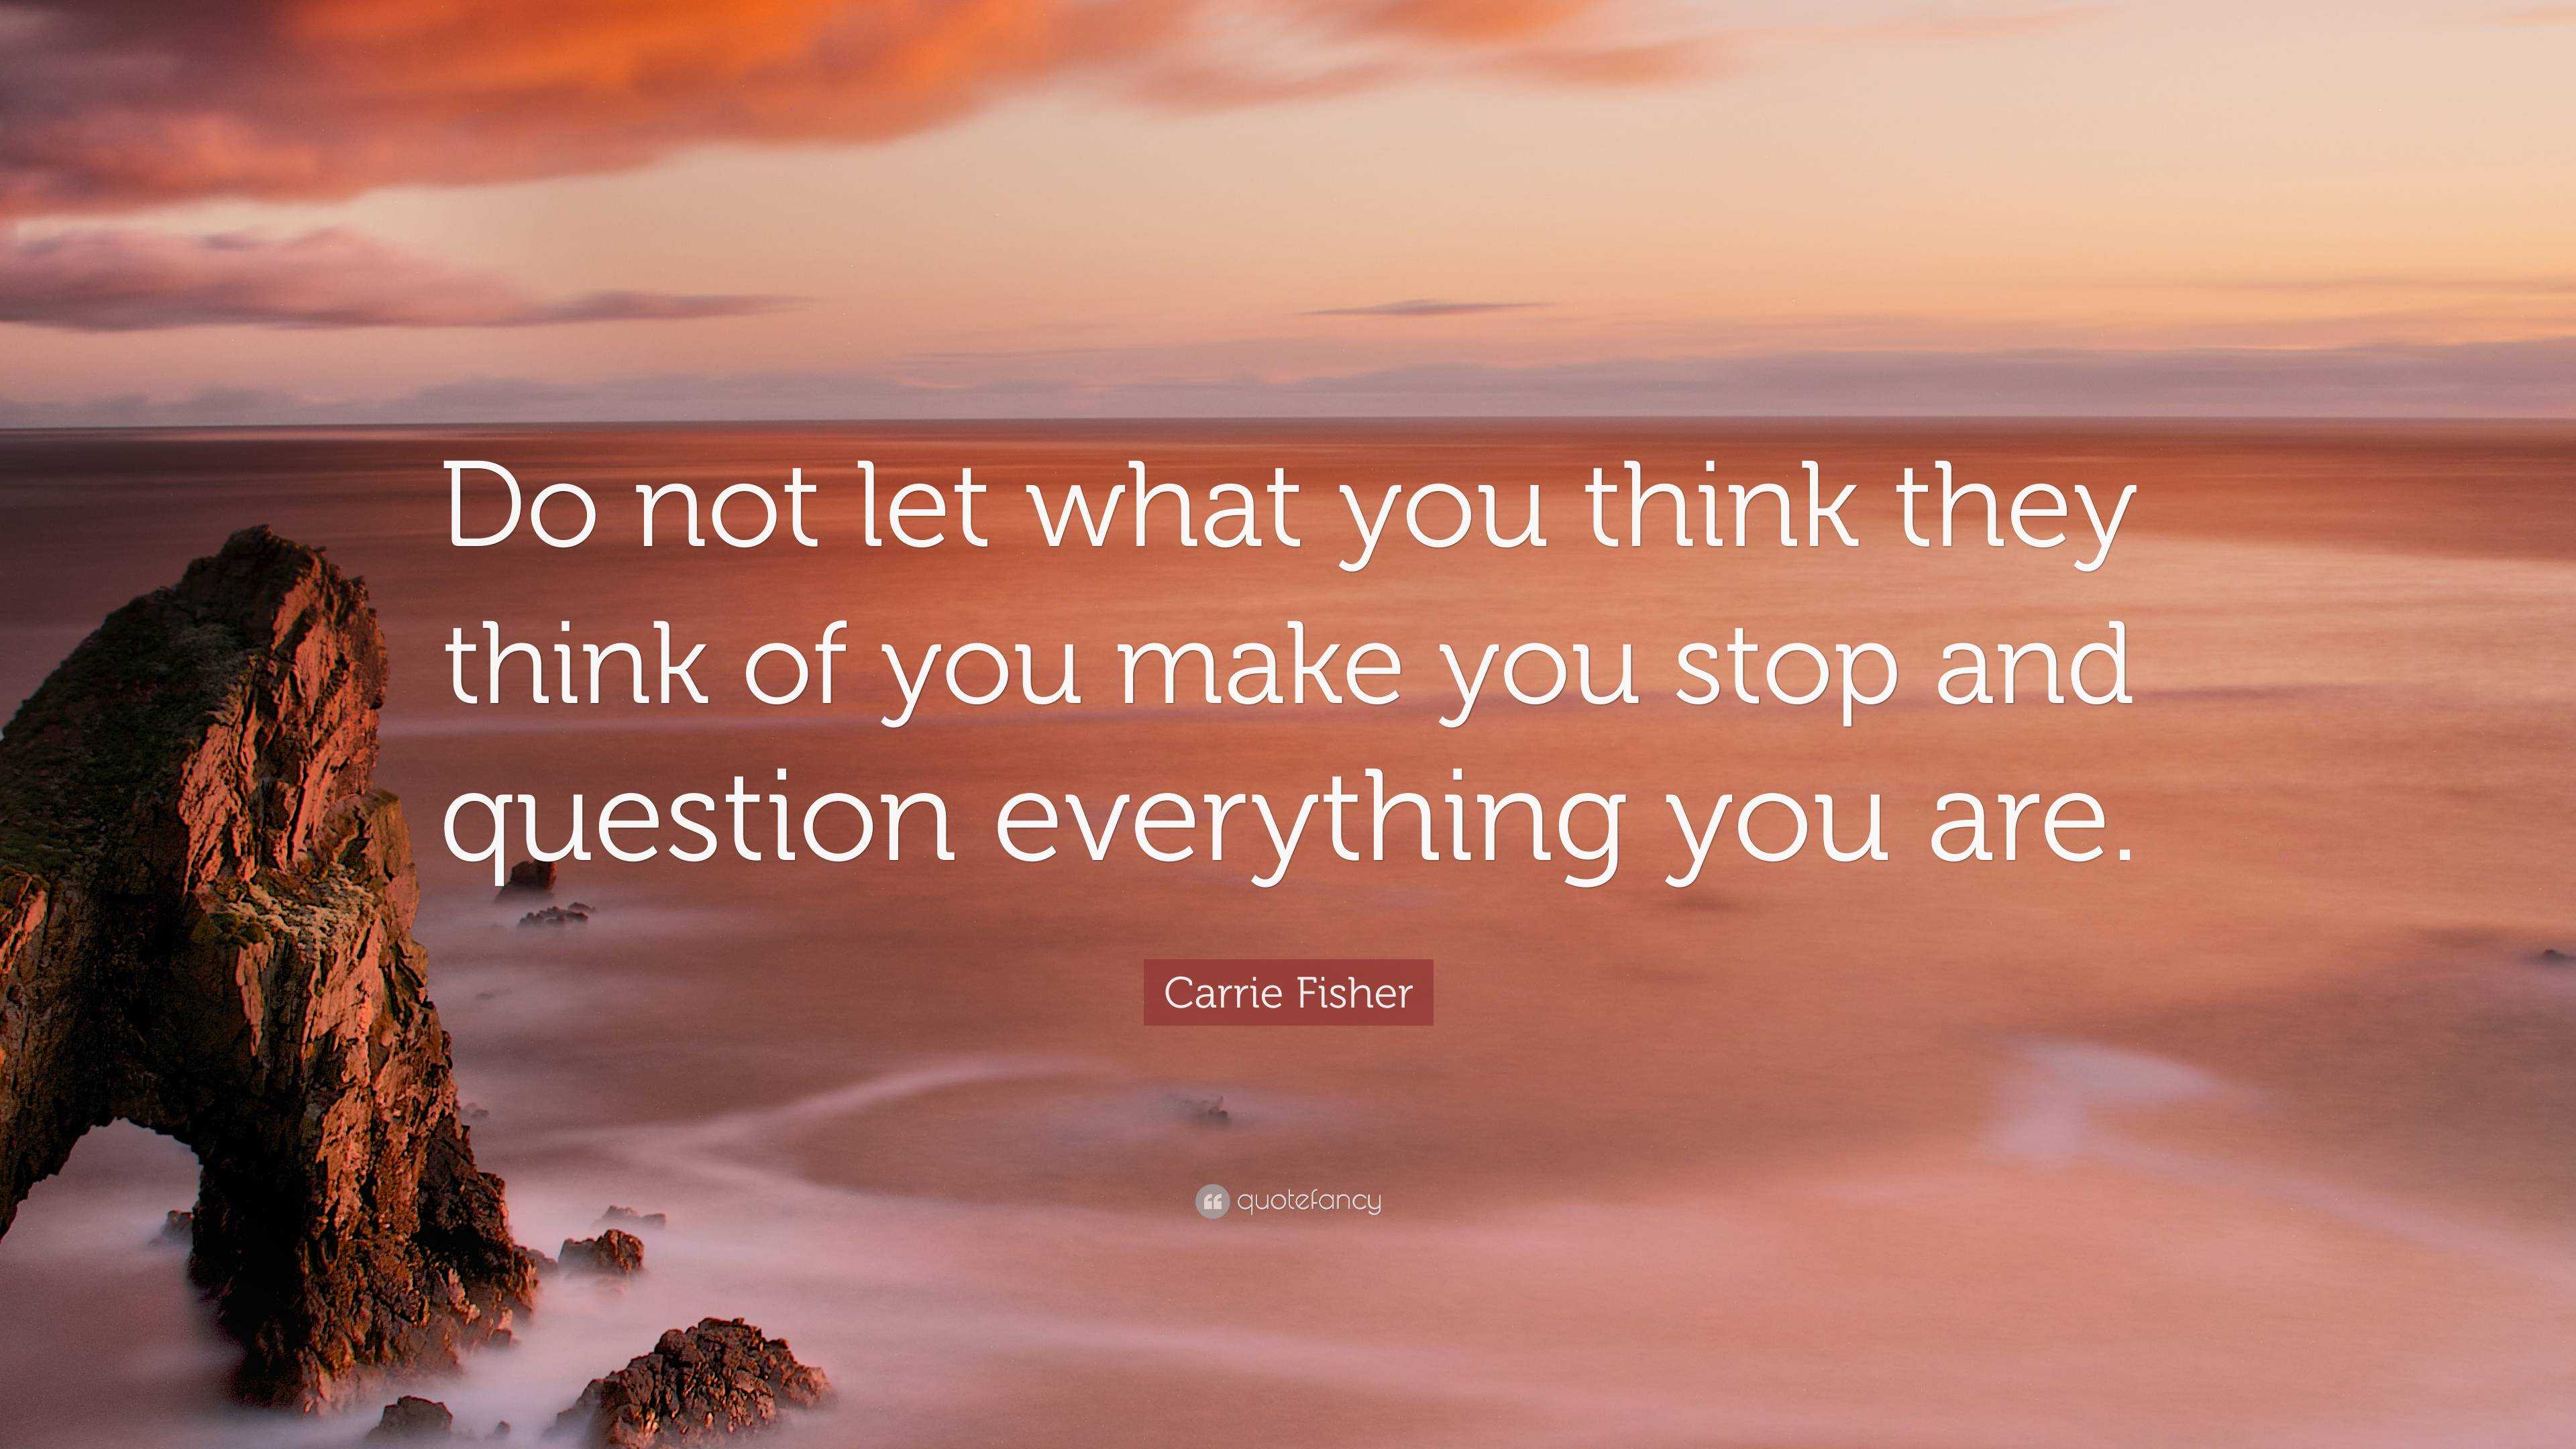 Carrie Fisher Quote “Do not let what you think they think